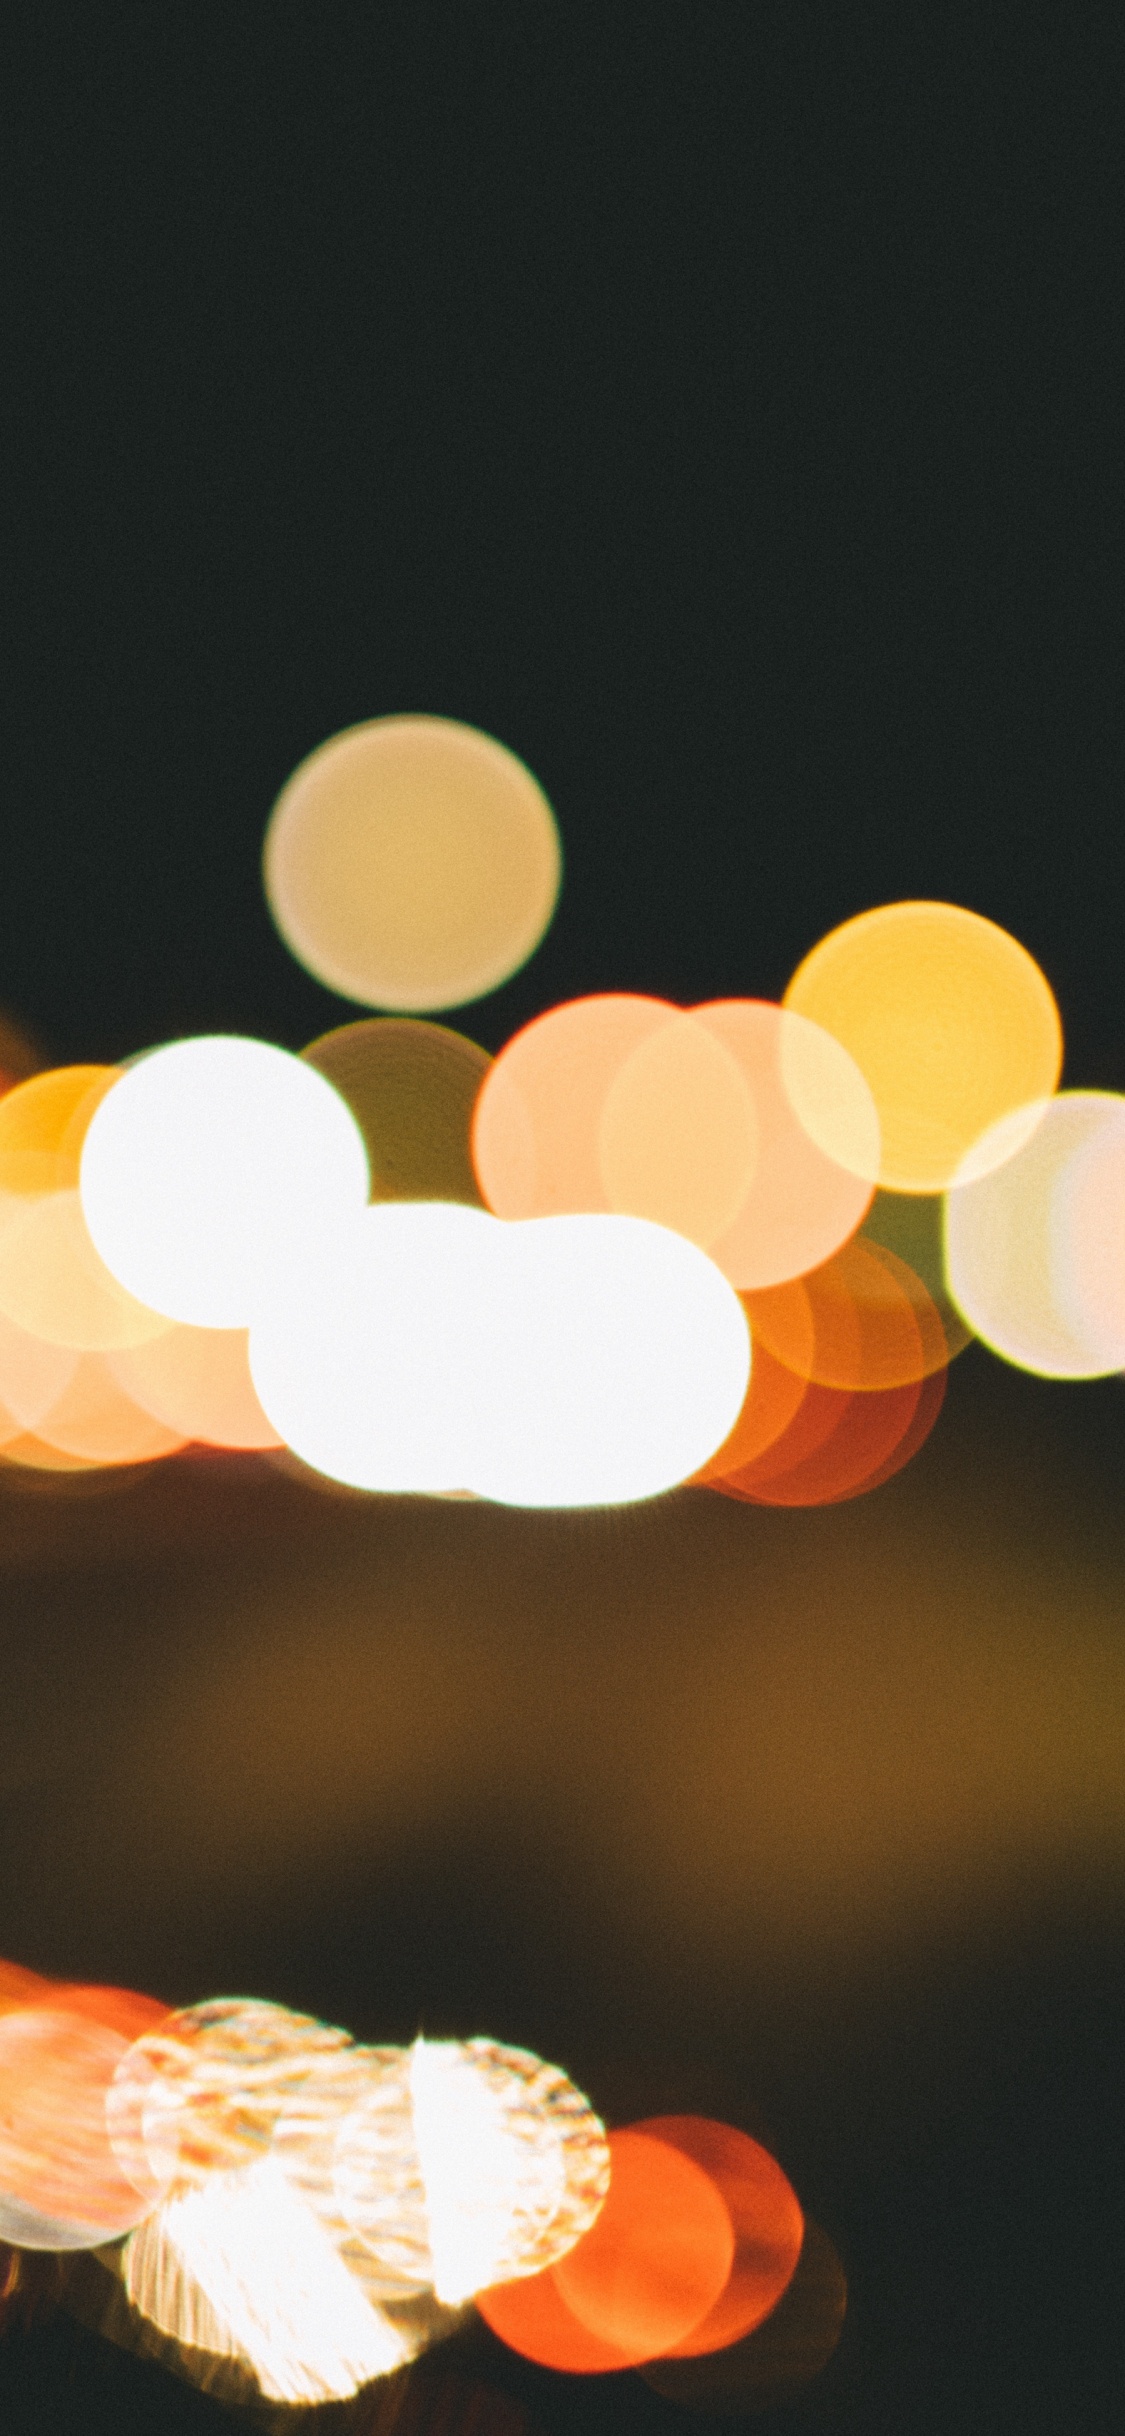 Bokeh Photography of Yellow Lights. Wallpaper in 1125x2436 Resolution